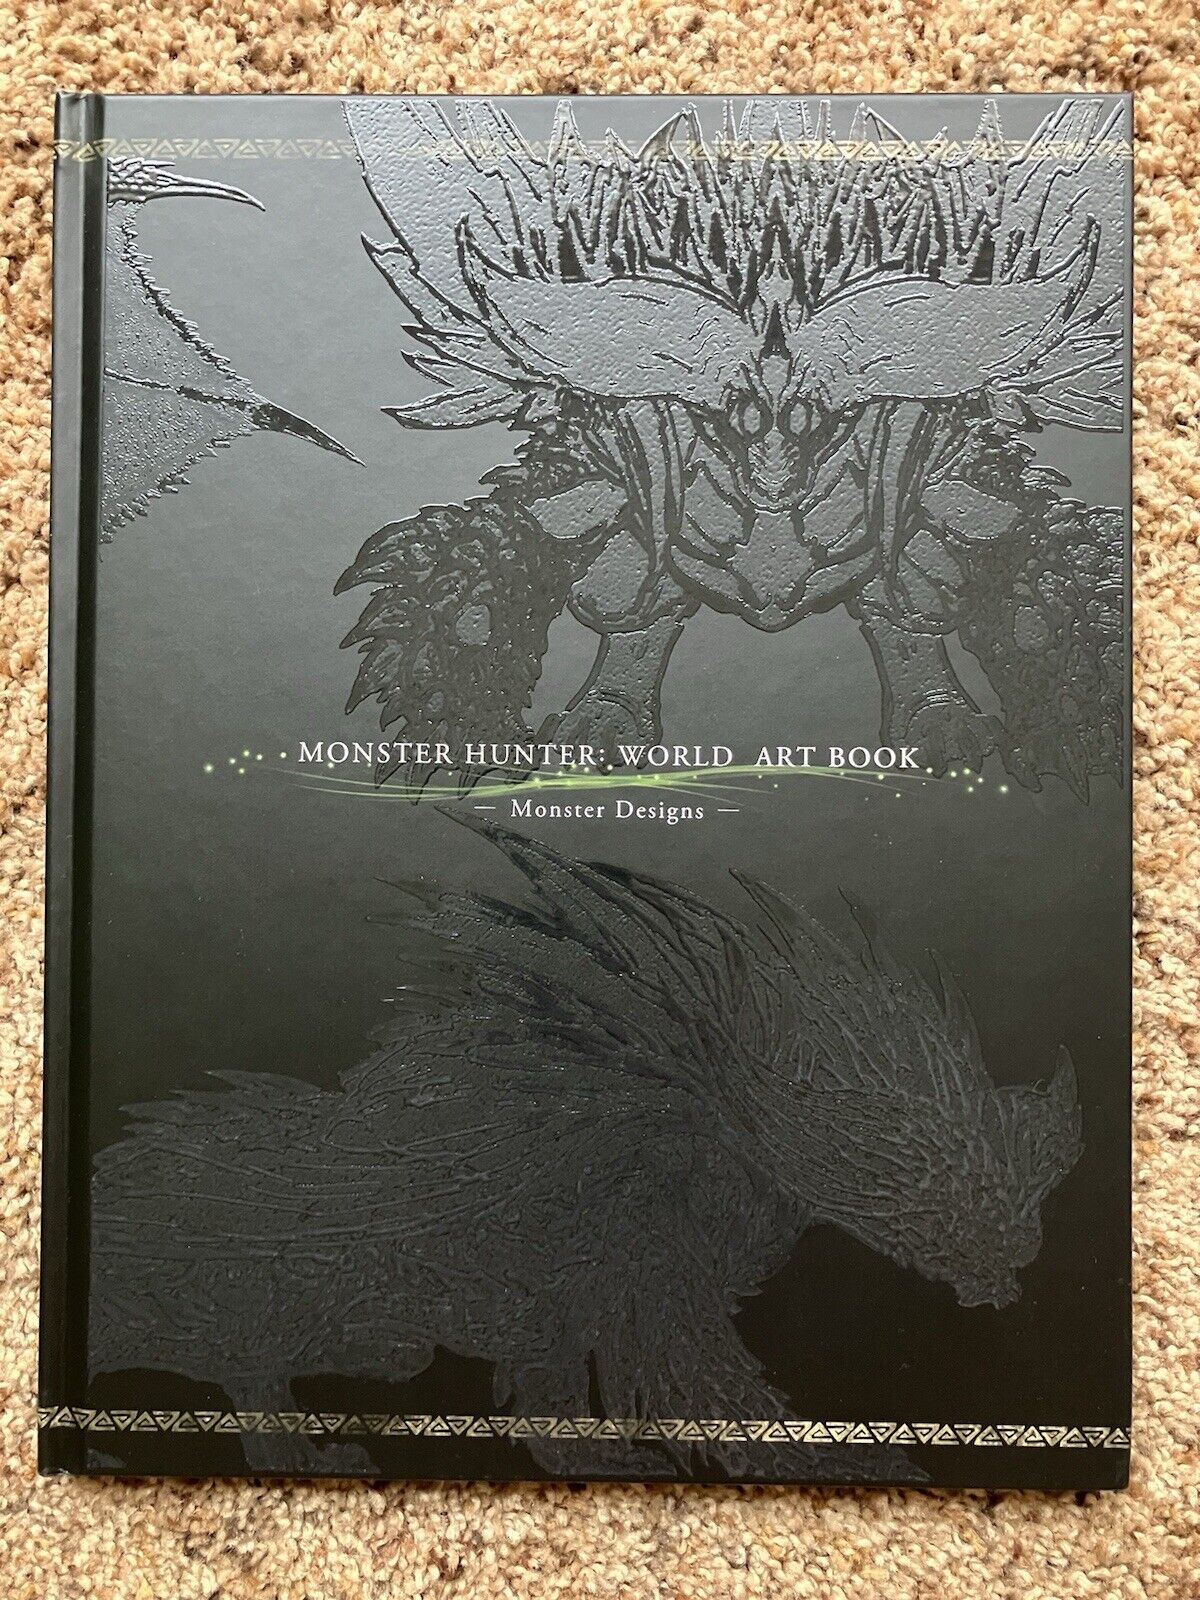 Monster Hunter World Art Book Monster Designs Collector's Edition Hard Cover